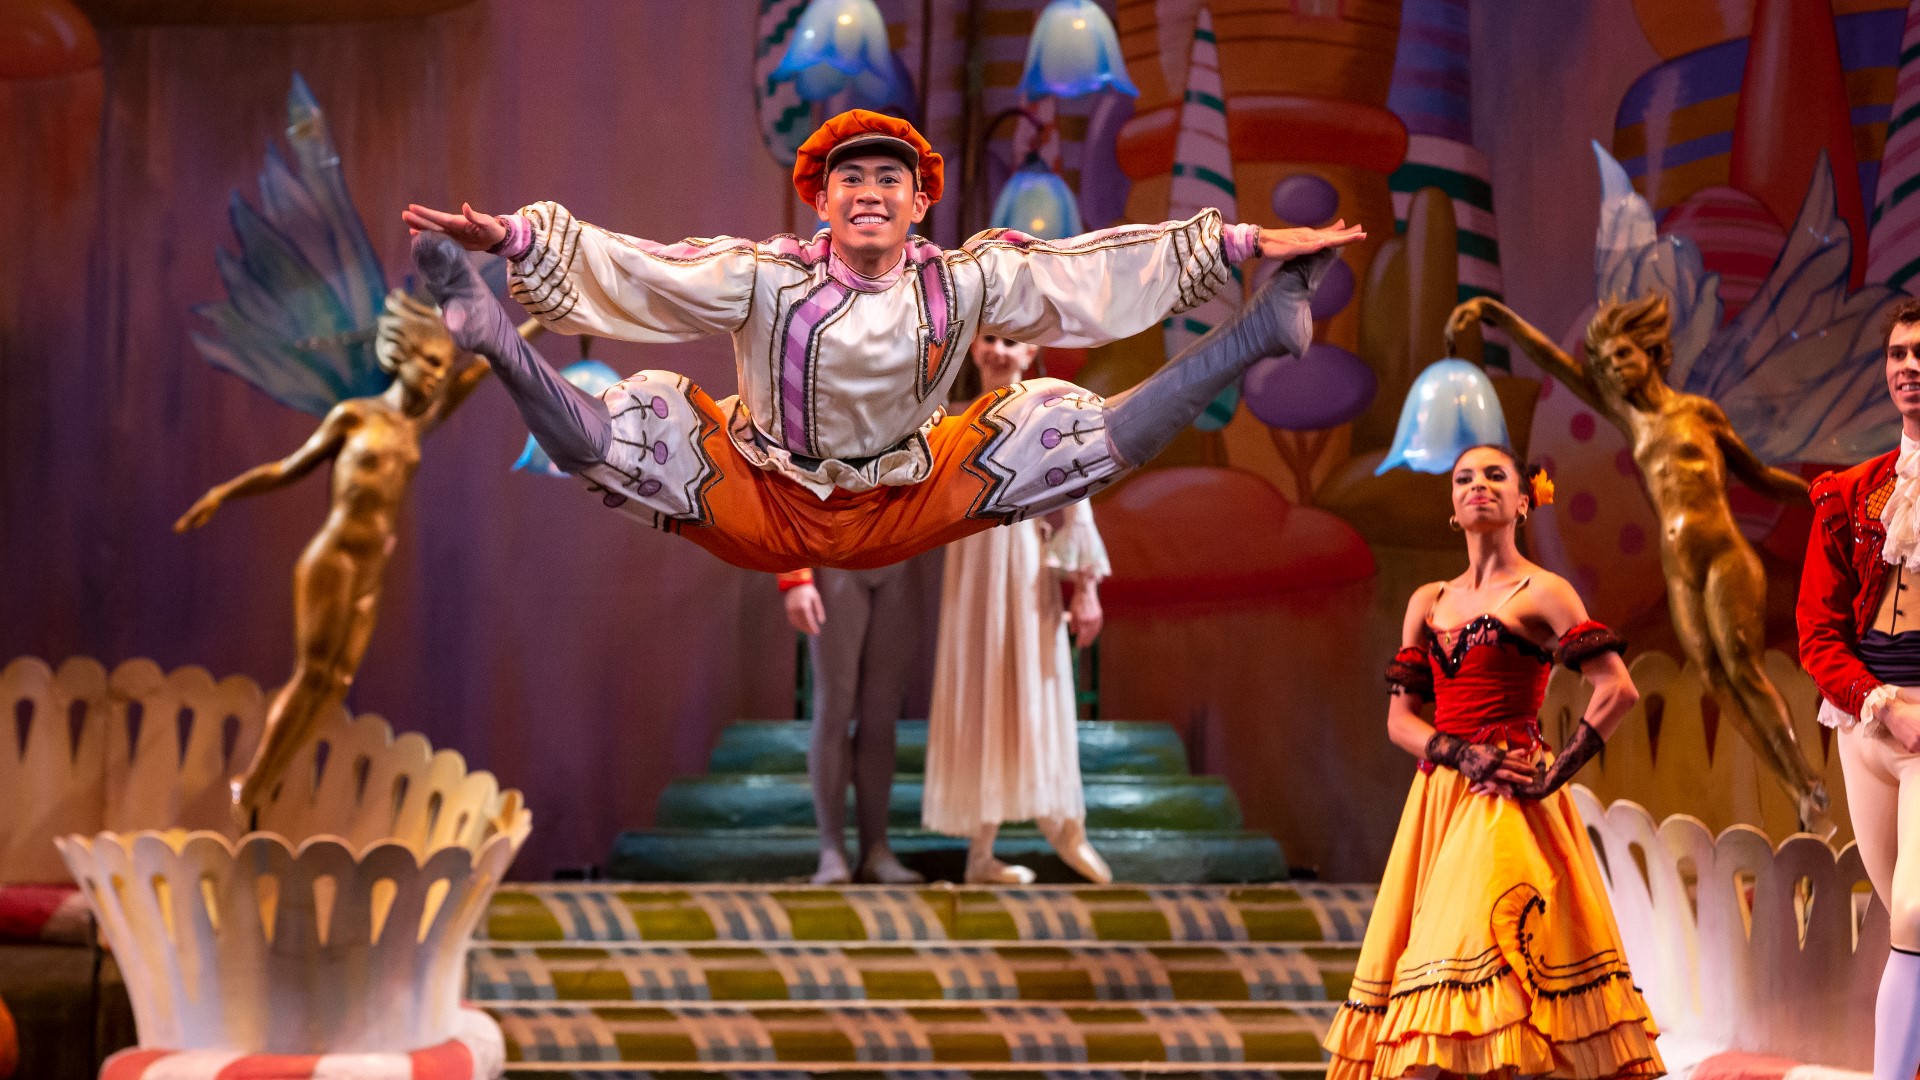 Costumes and set species were three decades old, and falling apart. Colorado Ballet will debut the new 'The Nutcracker' production in November 2021.